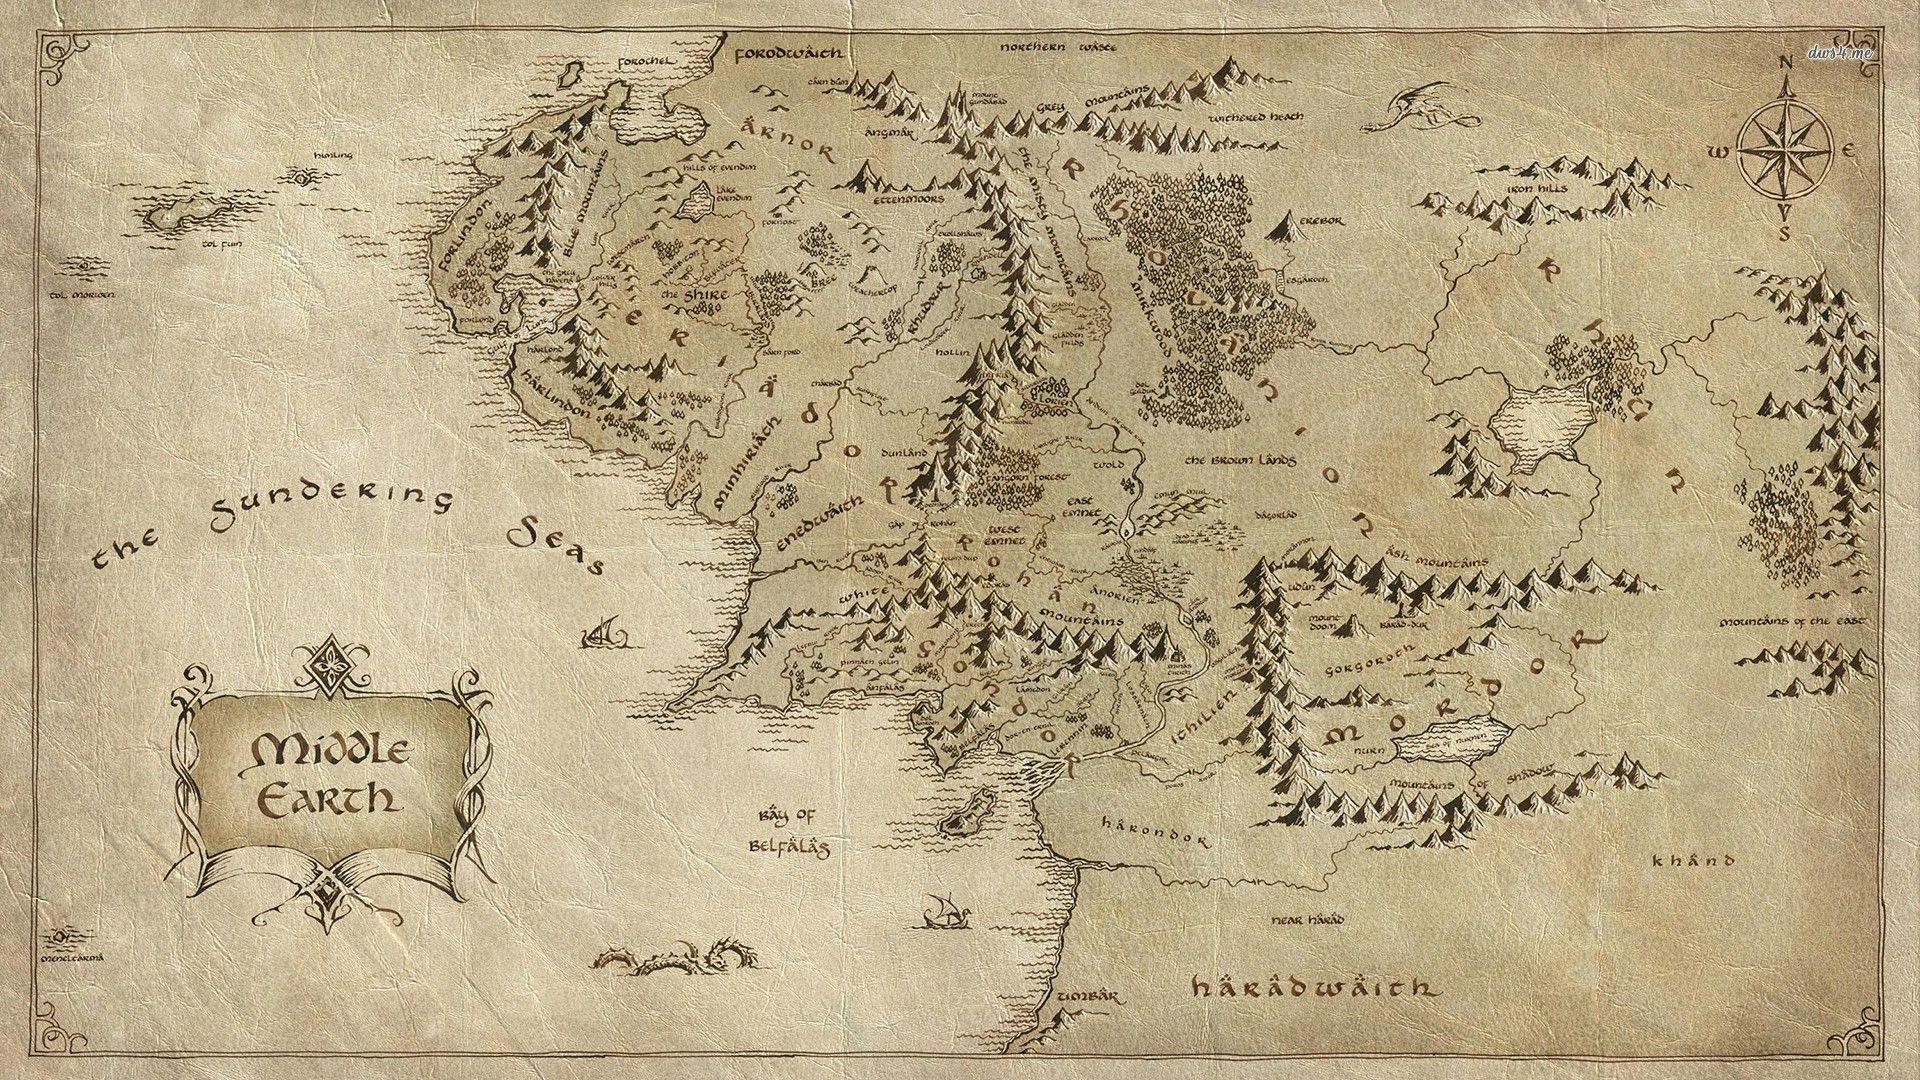 Map Of Middle Earth Wallpapers